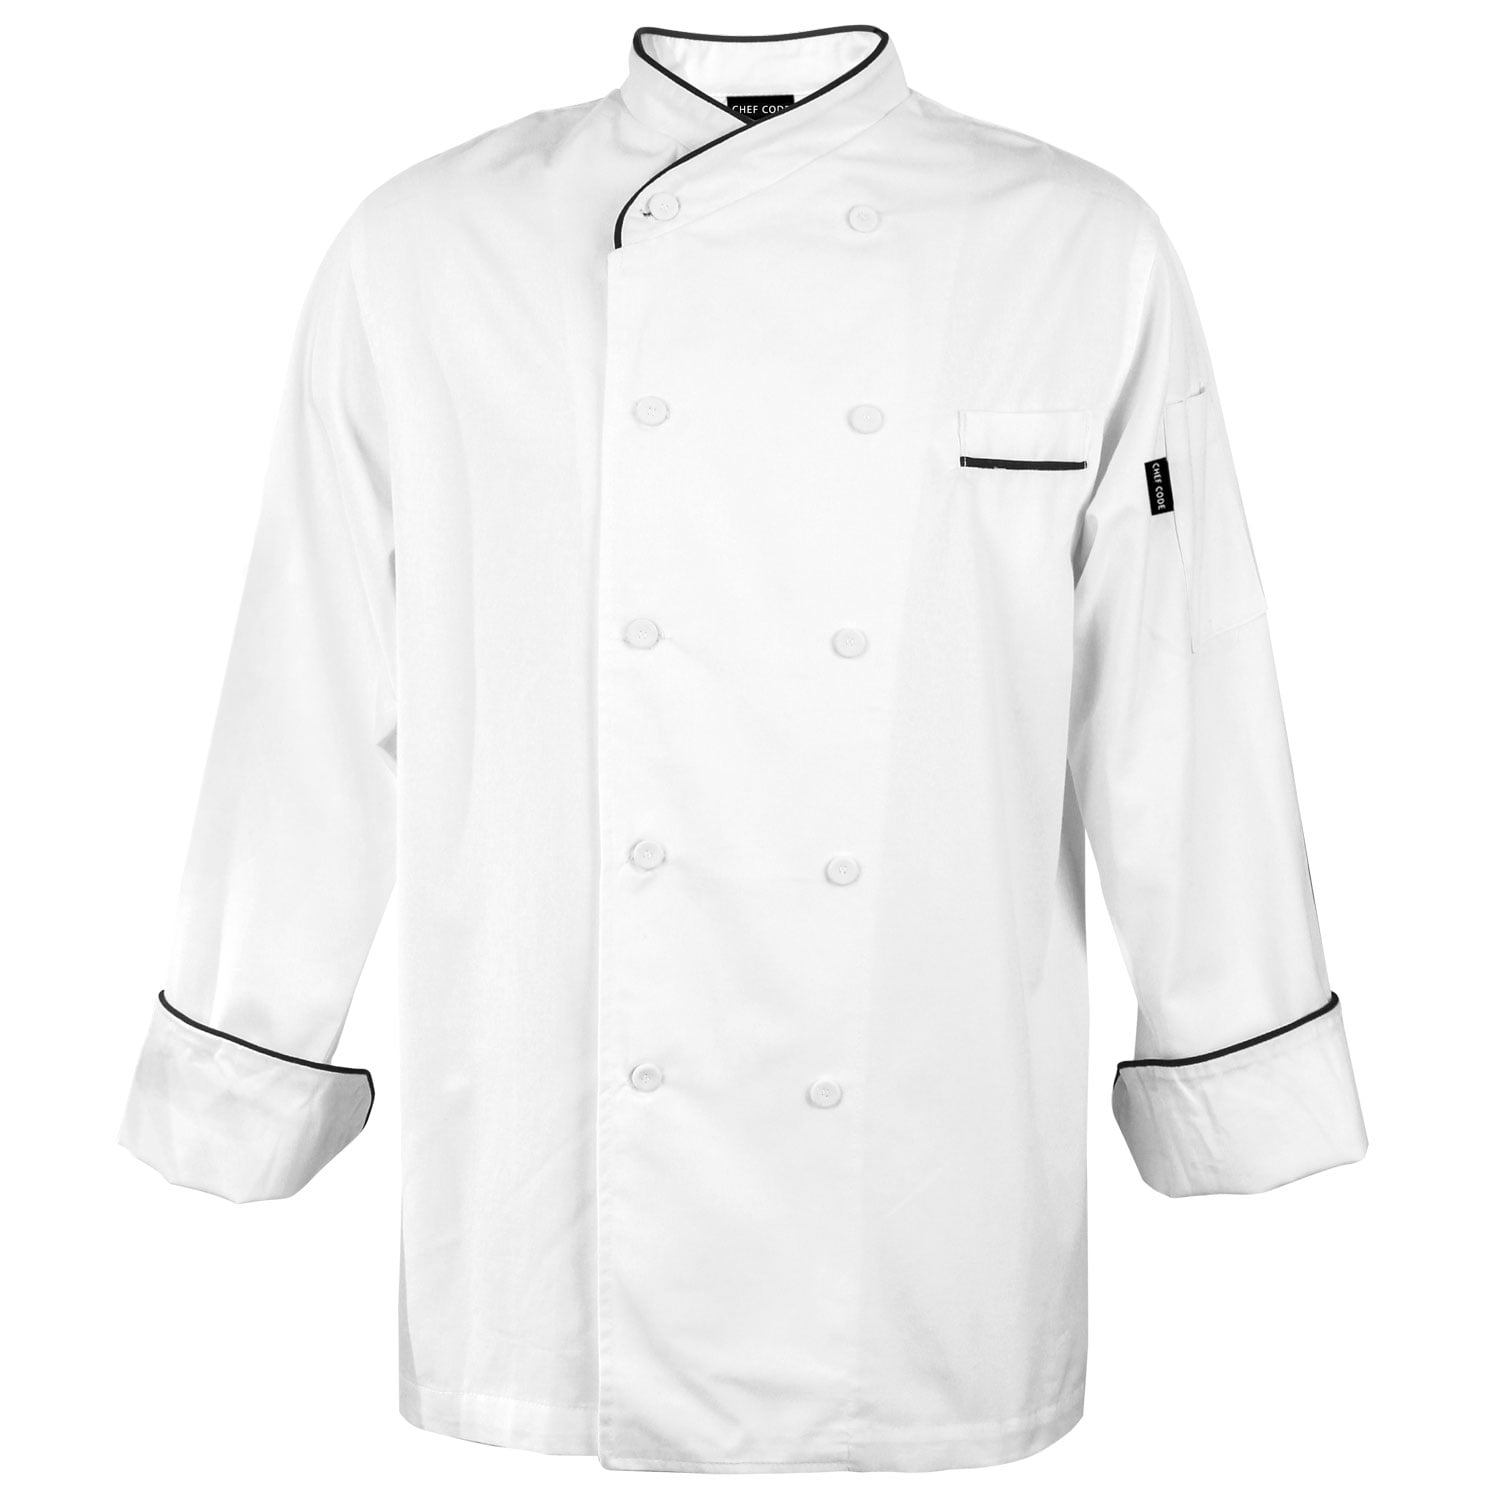 BRAND NEW CHEFS JACKET WITH CONTRAST TRIM UNISEX BLACK OR WHITE BANQUET COAT 